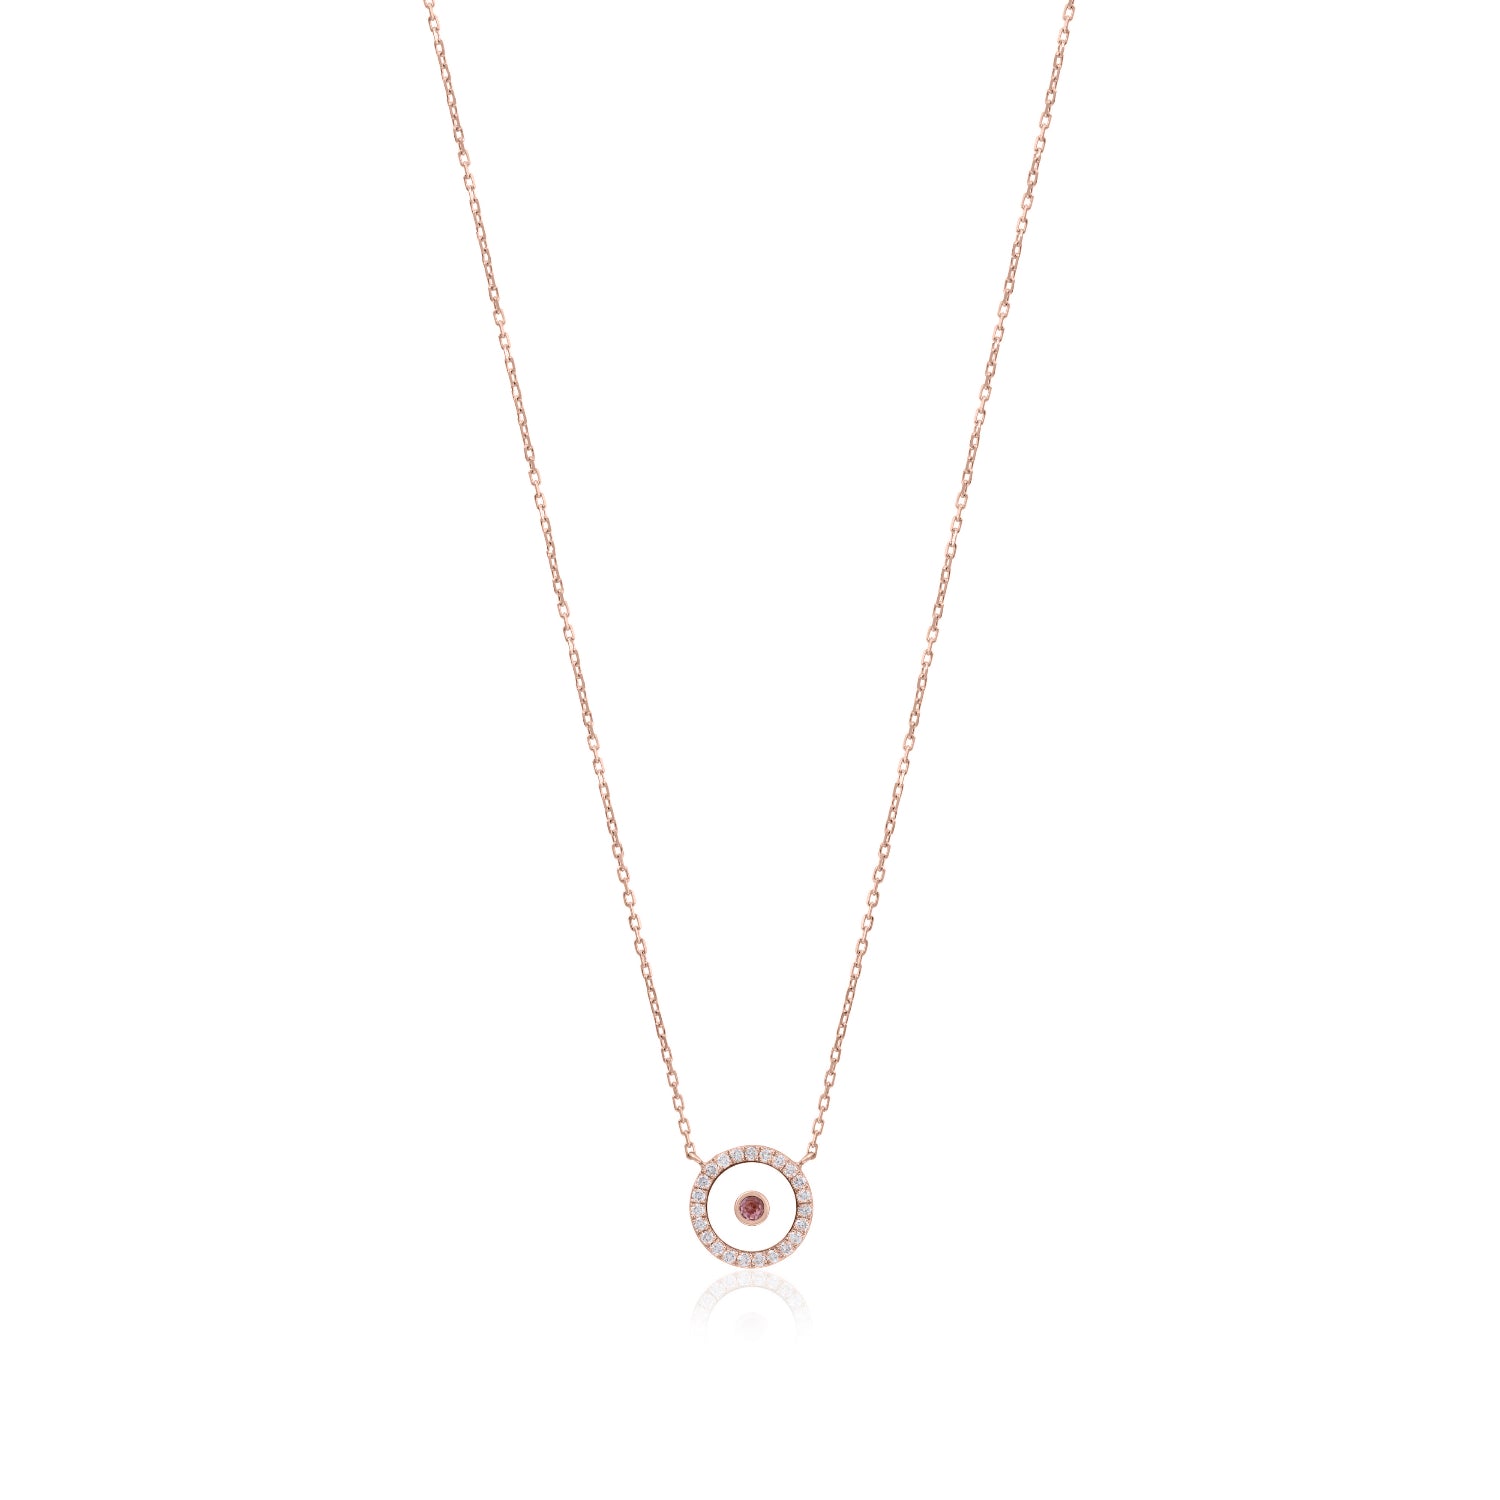 Tourmaline October Birthstone Necklace in Rose Gold